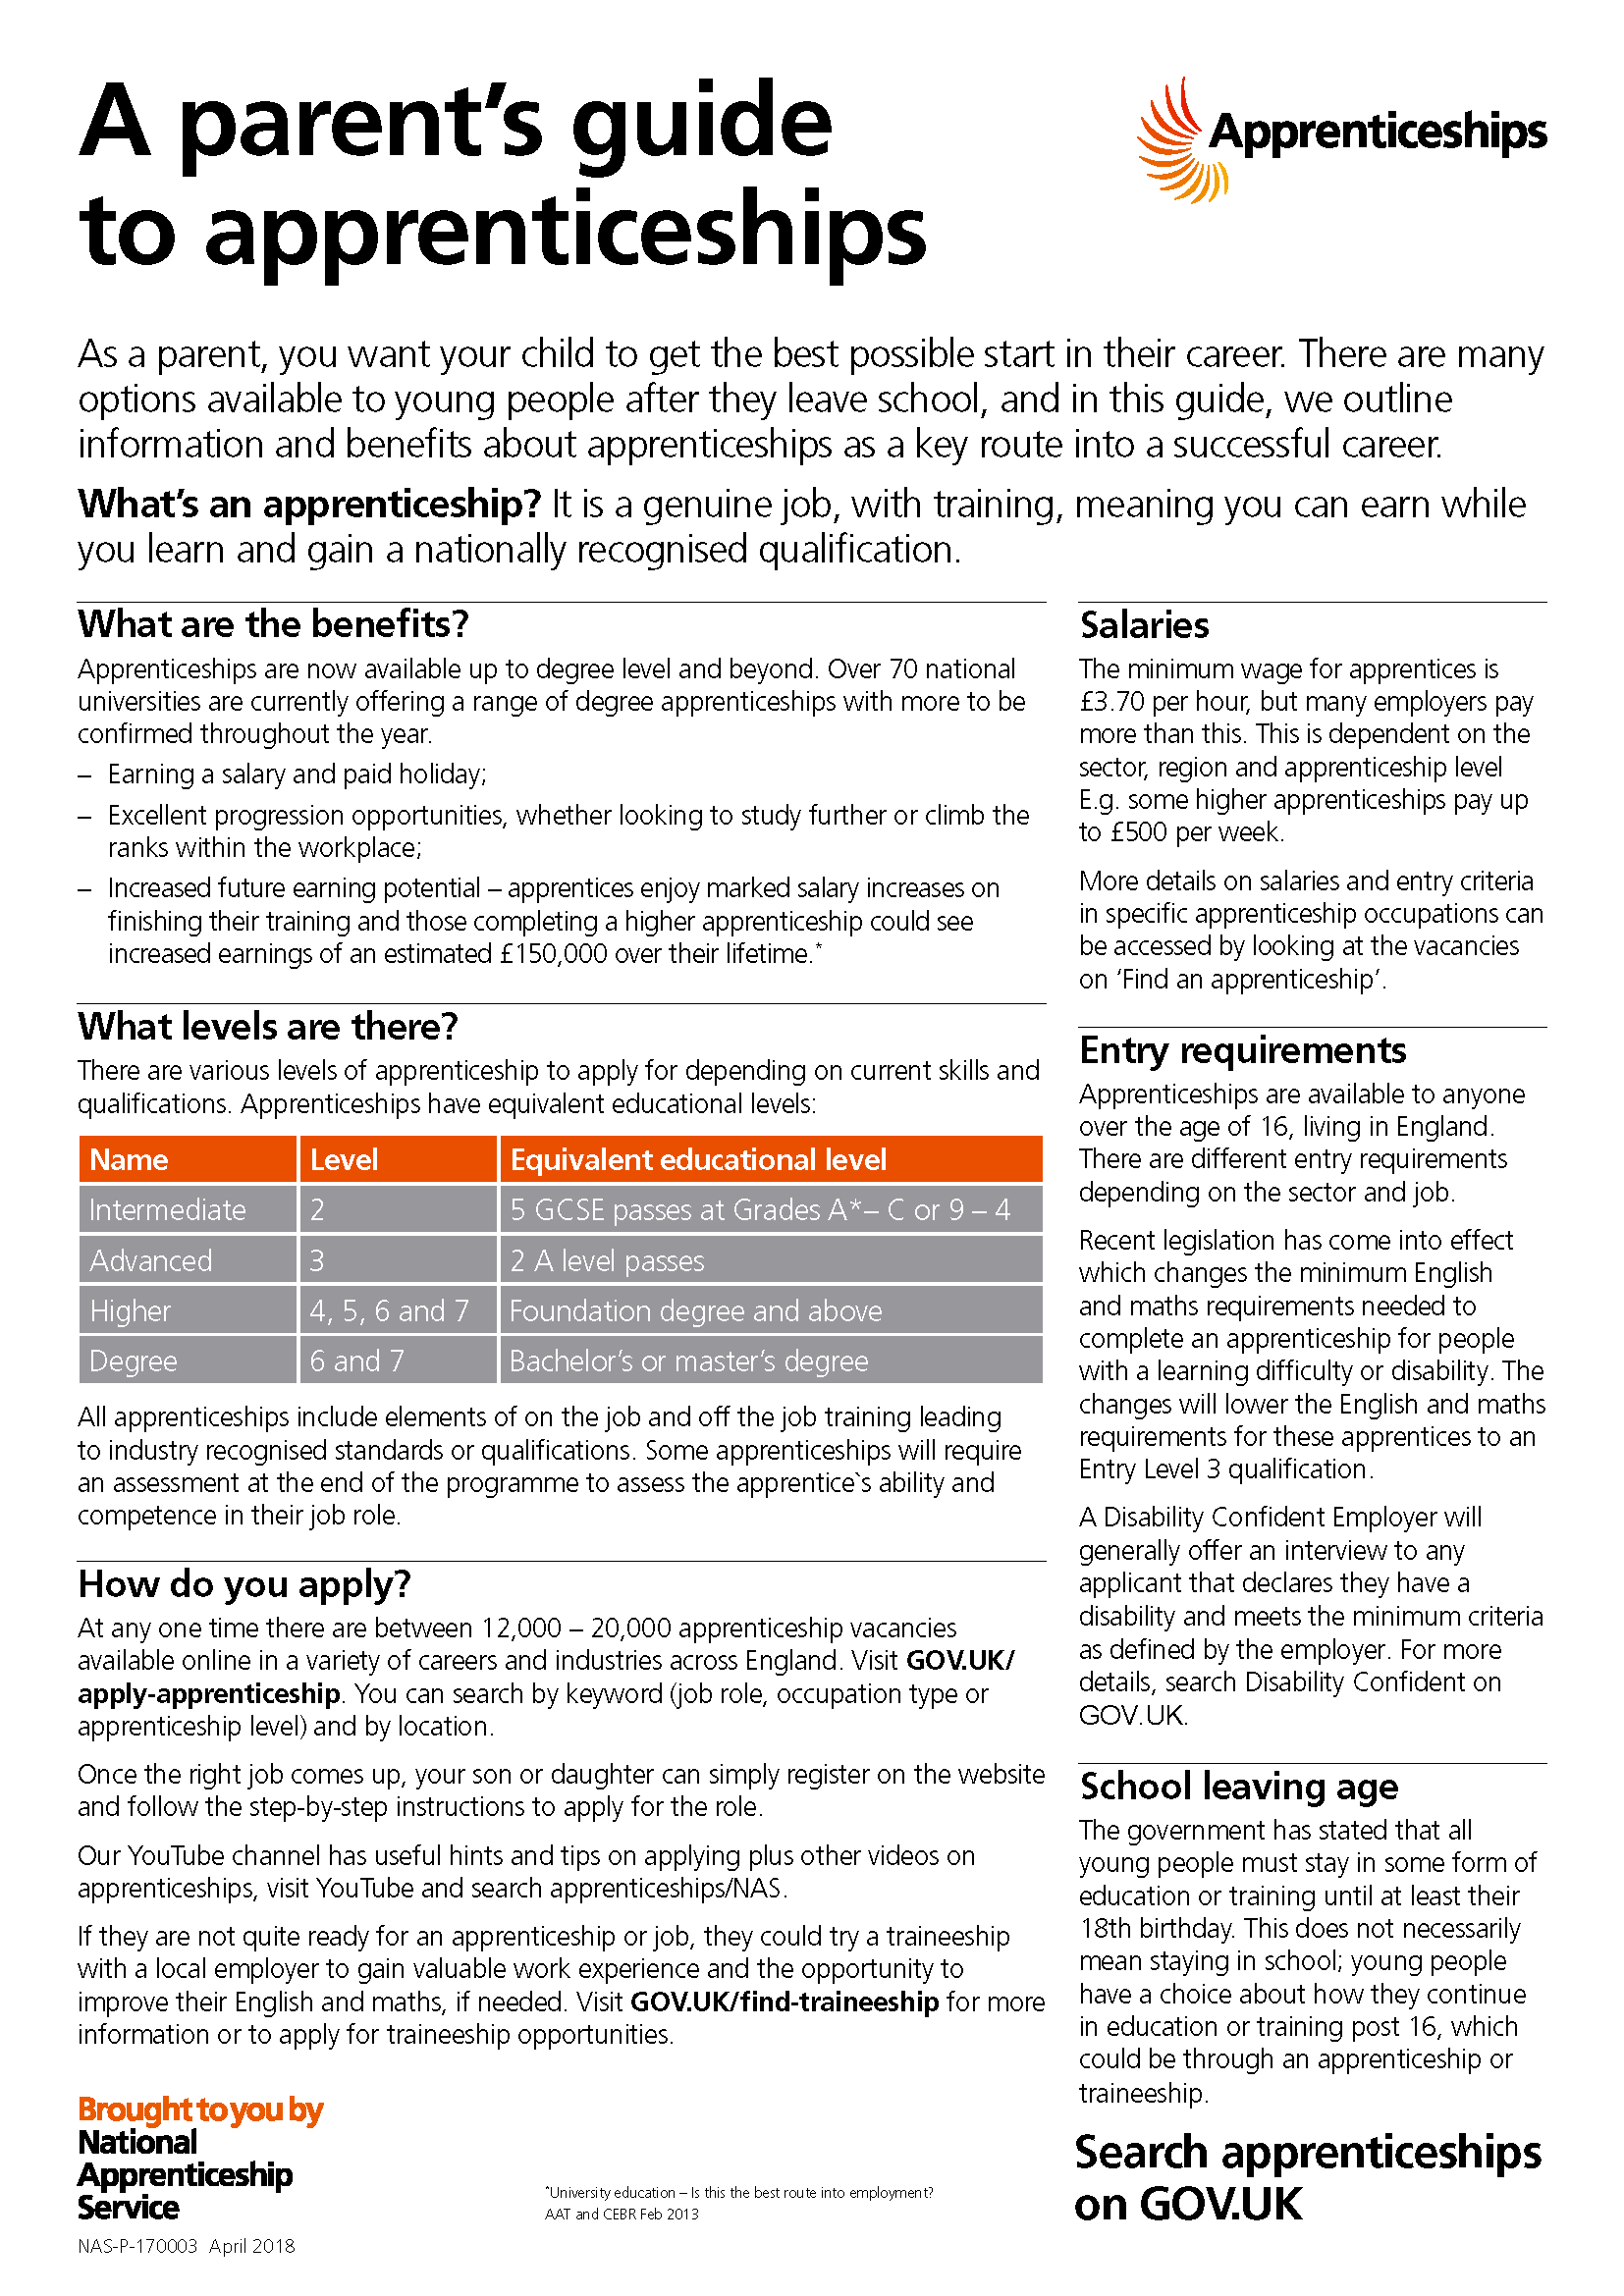 Parents' Guide to Apprenticeships